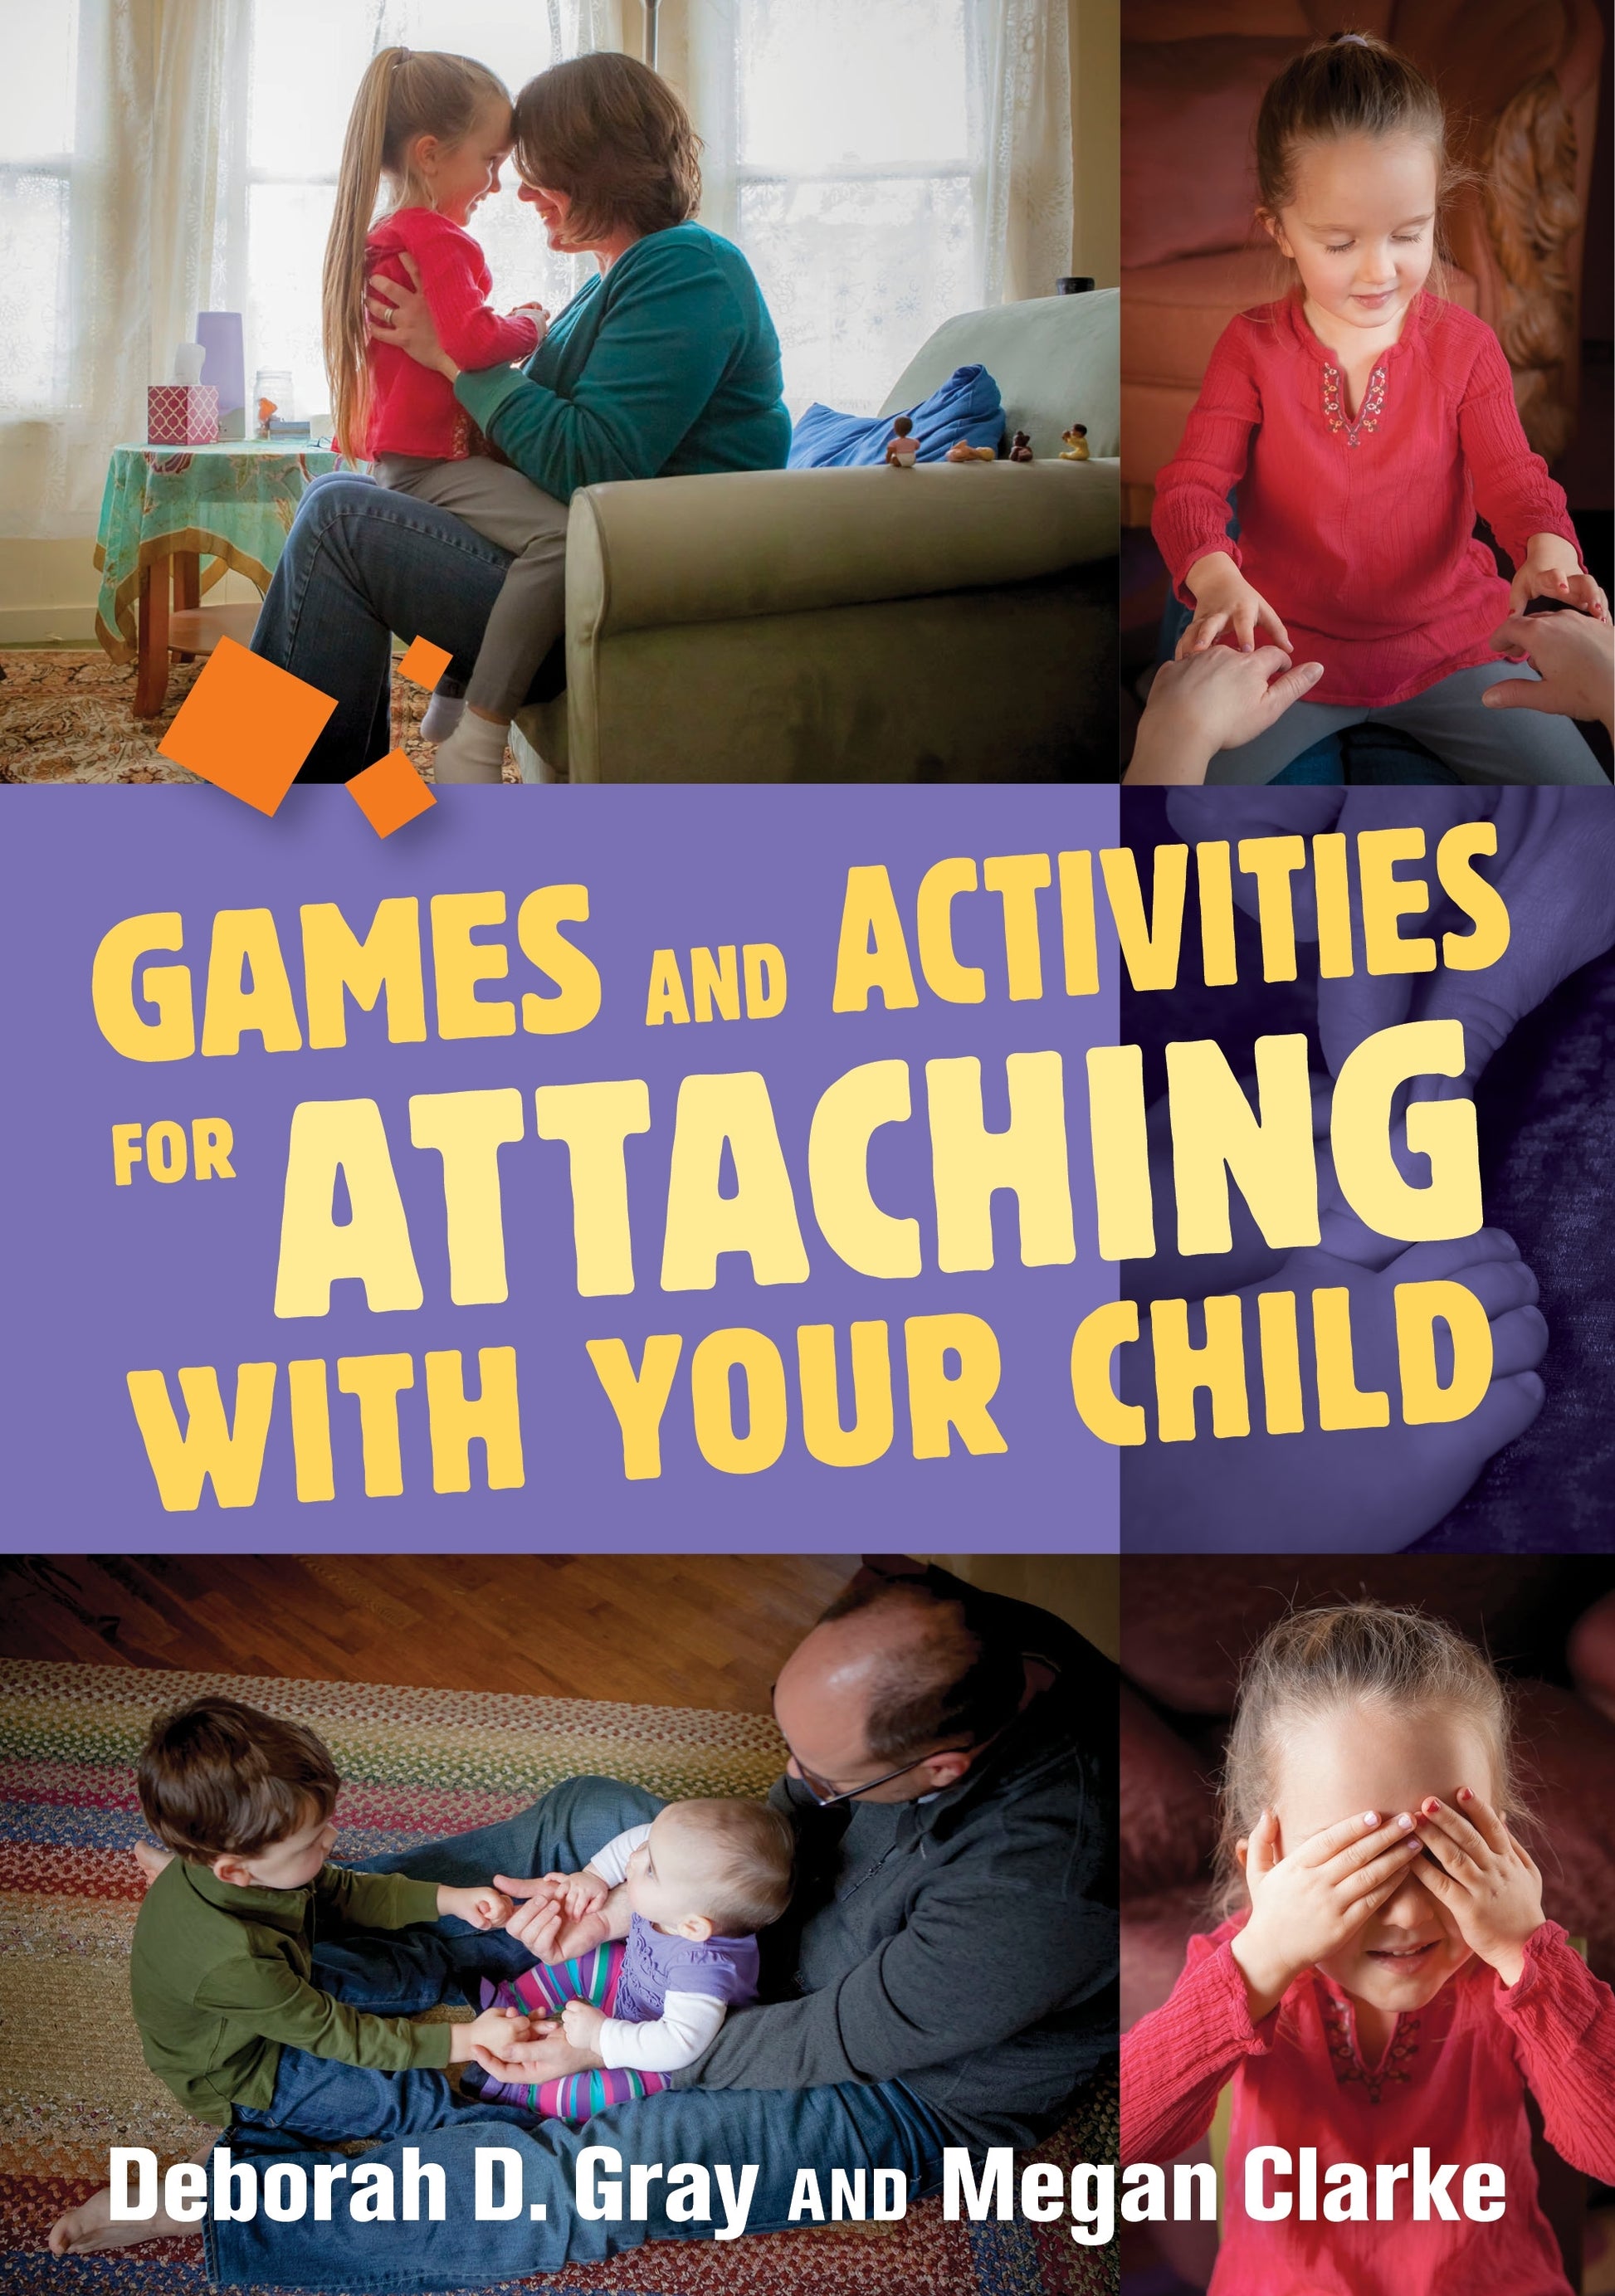 Games and Activities for Attaching With Your Child by Megan Clarke, Deborah D. Gray